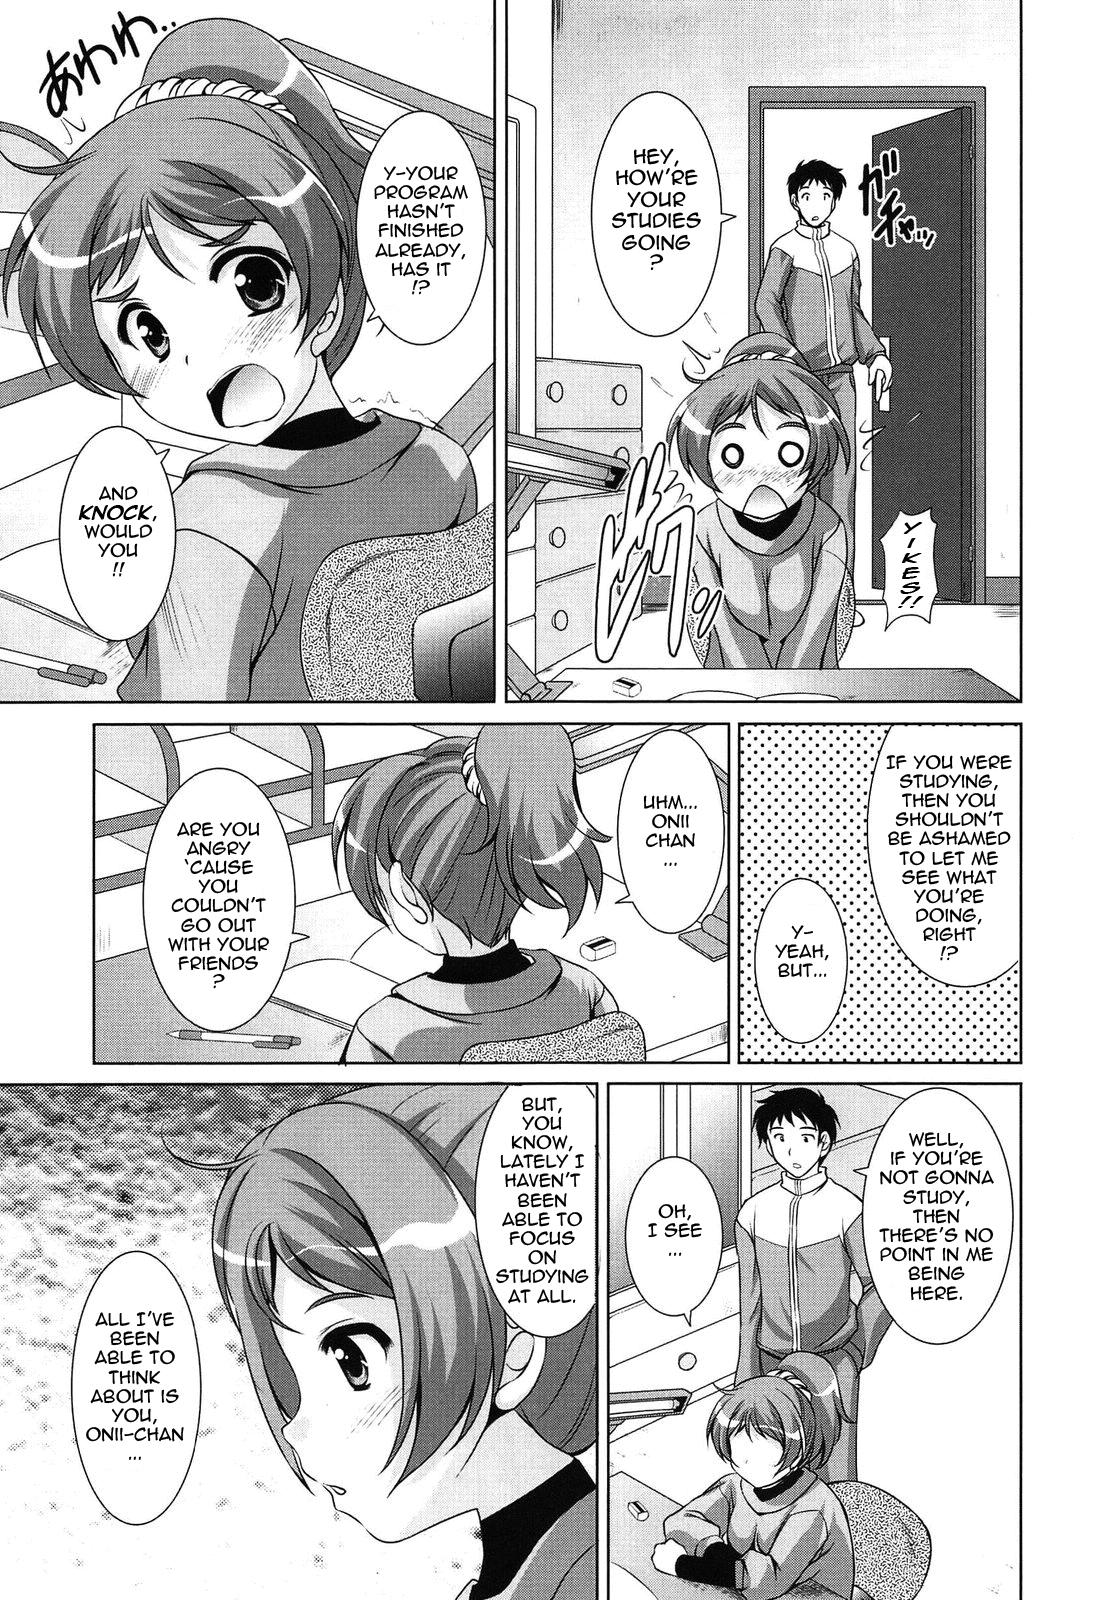 Bed Younger Girls! Celebration Ch. 1-7 Celebrity Nudes - Page 11